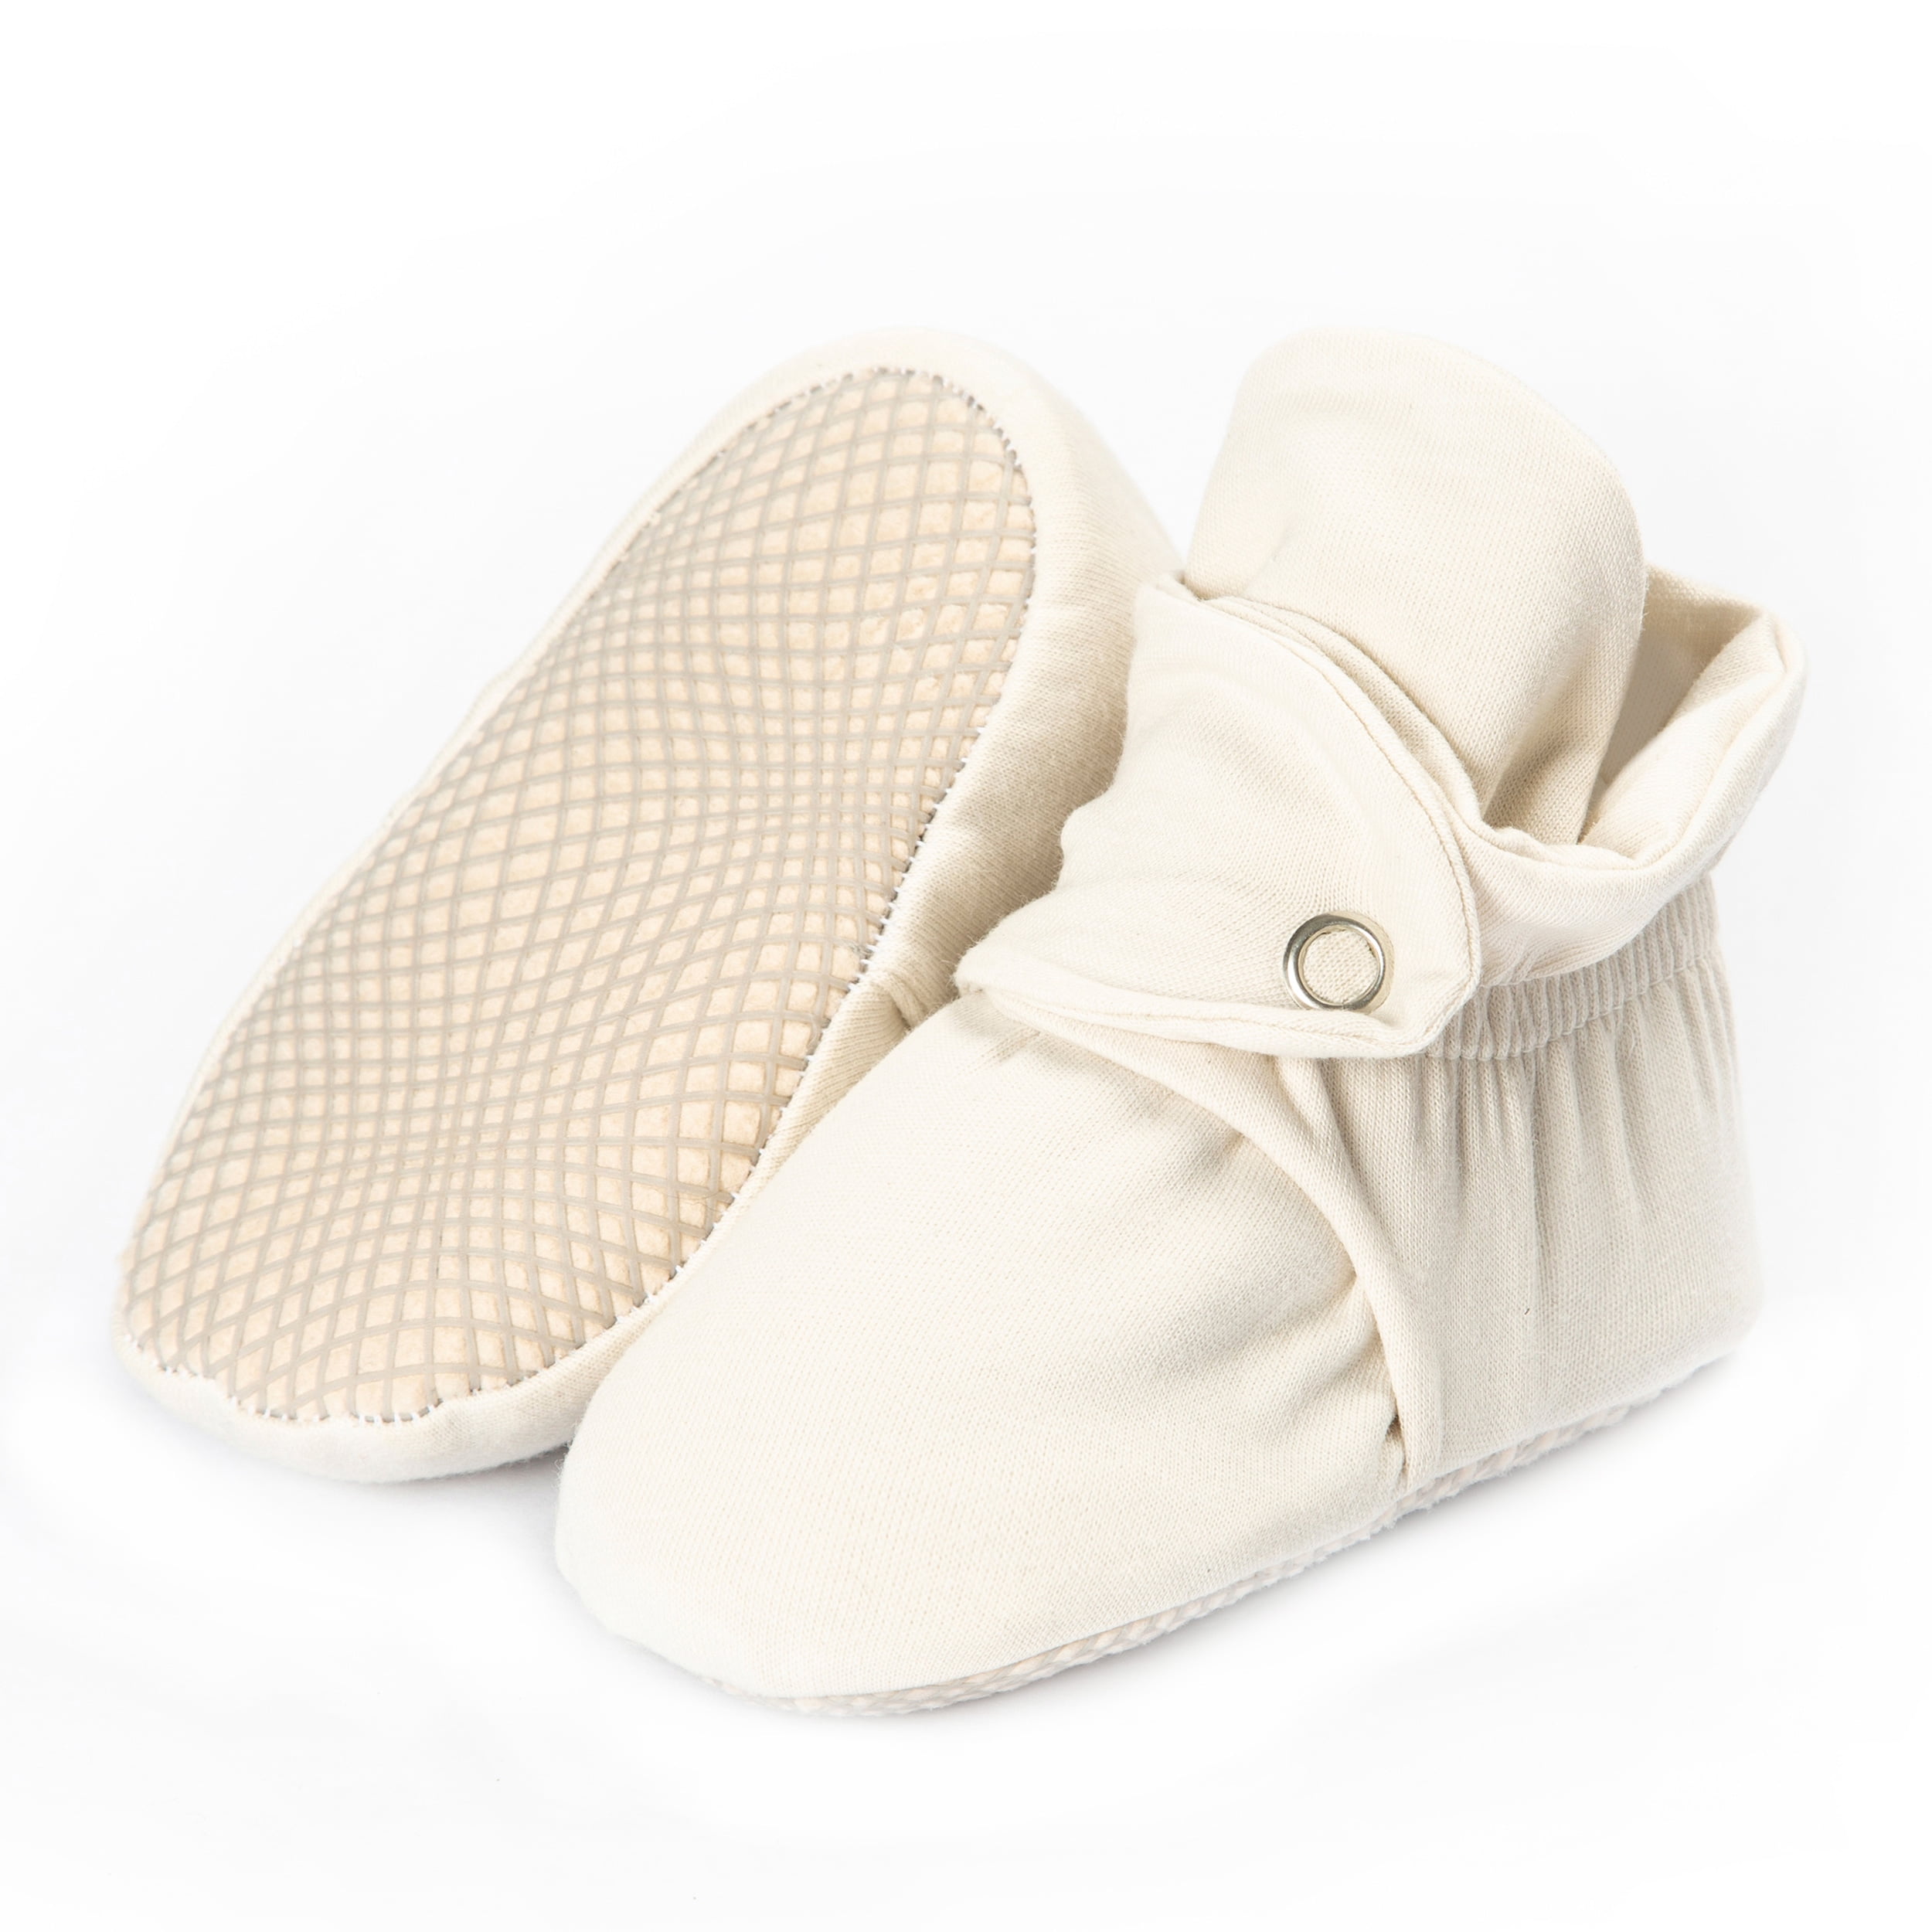 Cozy Fleece Baby Booties with Organic Cotton Lined Anti-Slip & Soft Sole Newborn Cute Pram Crib Prewalker Sock Shoes Unisex Baby Infant Toddler Slipper Booties Winter Warm Shoes